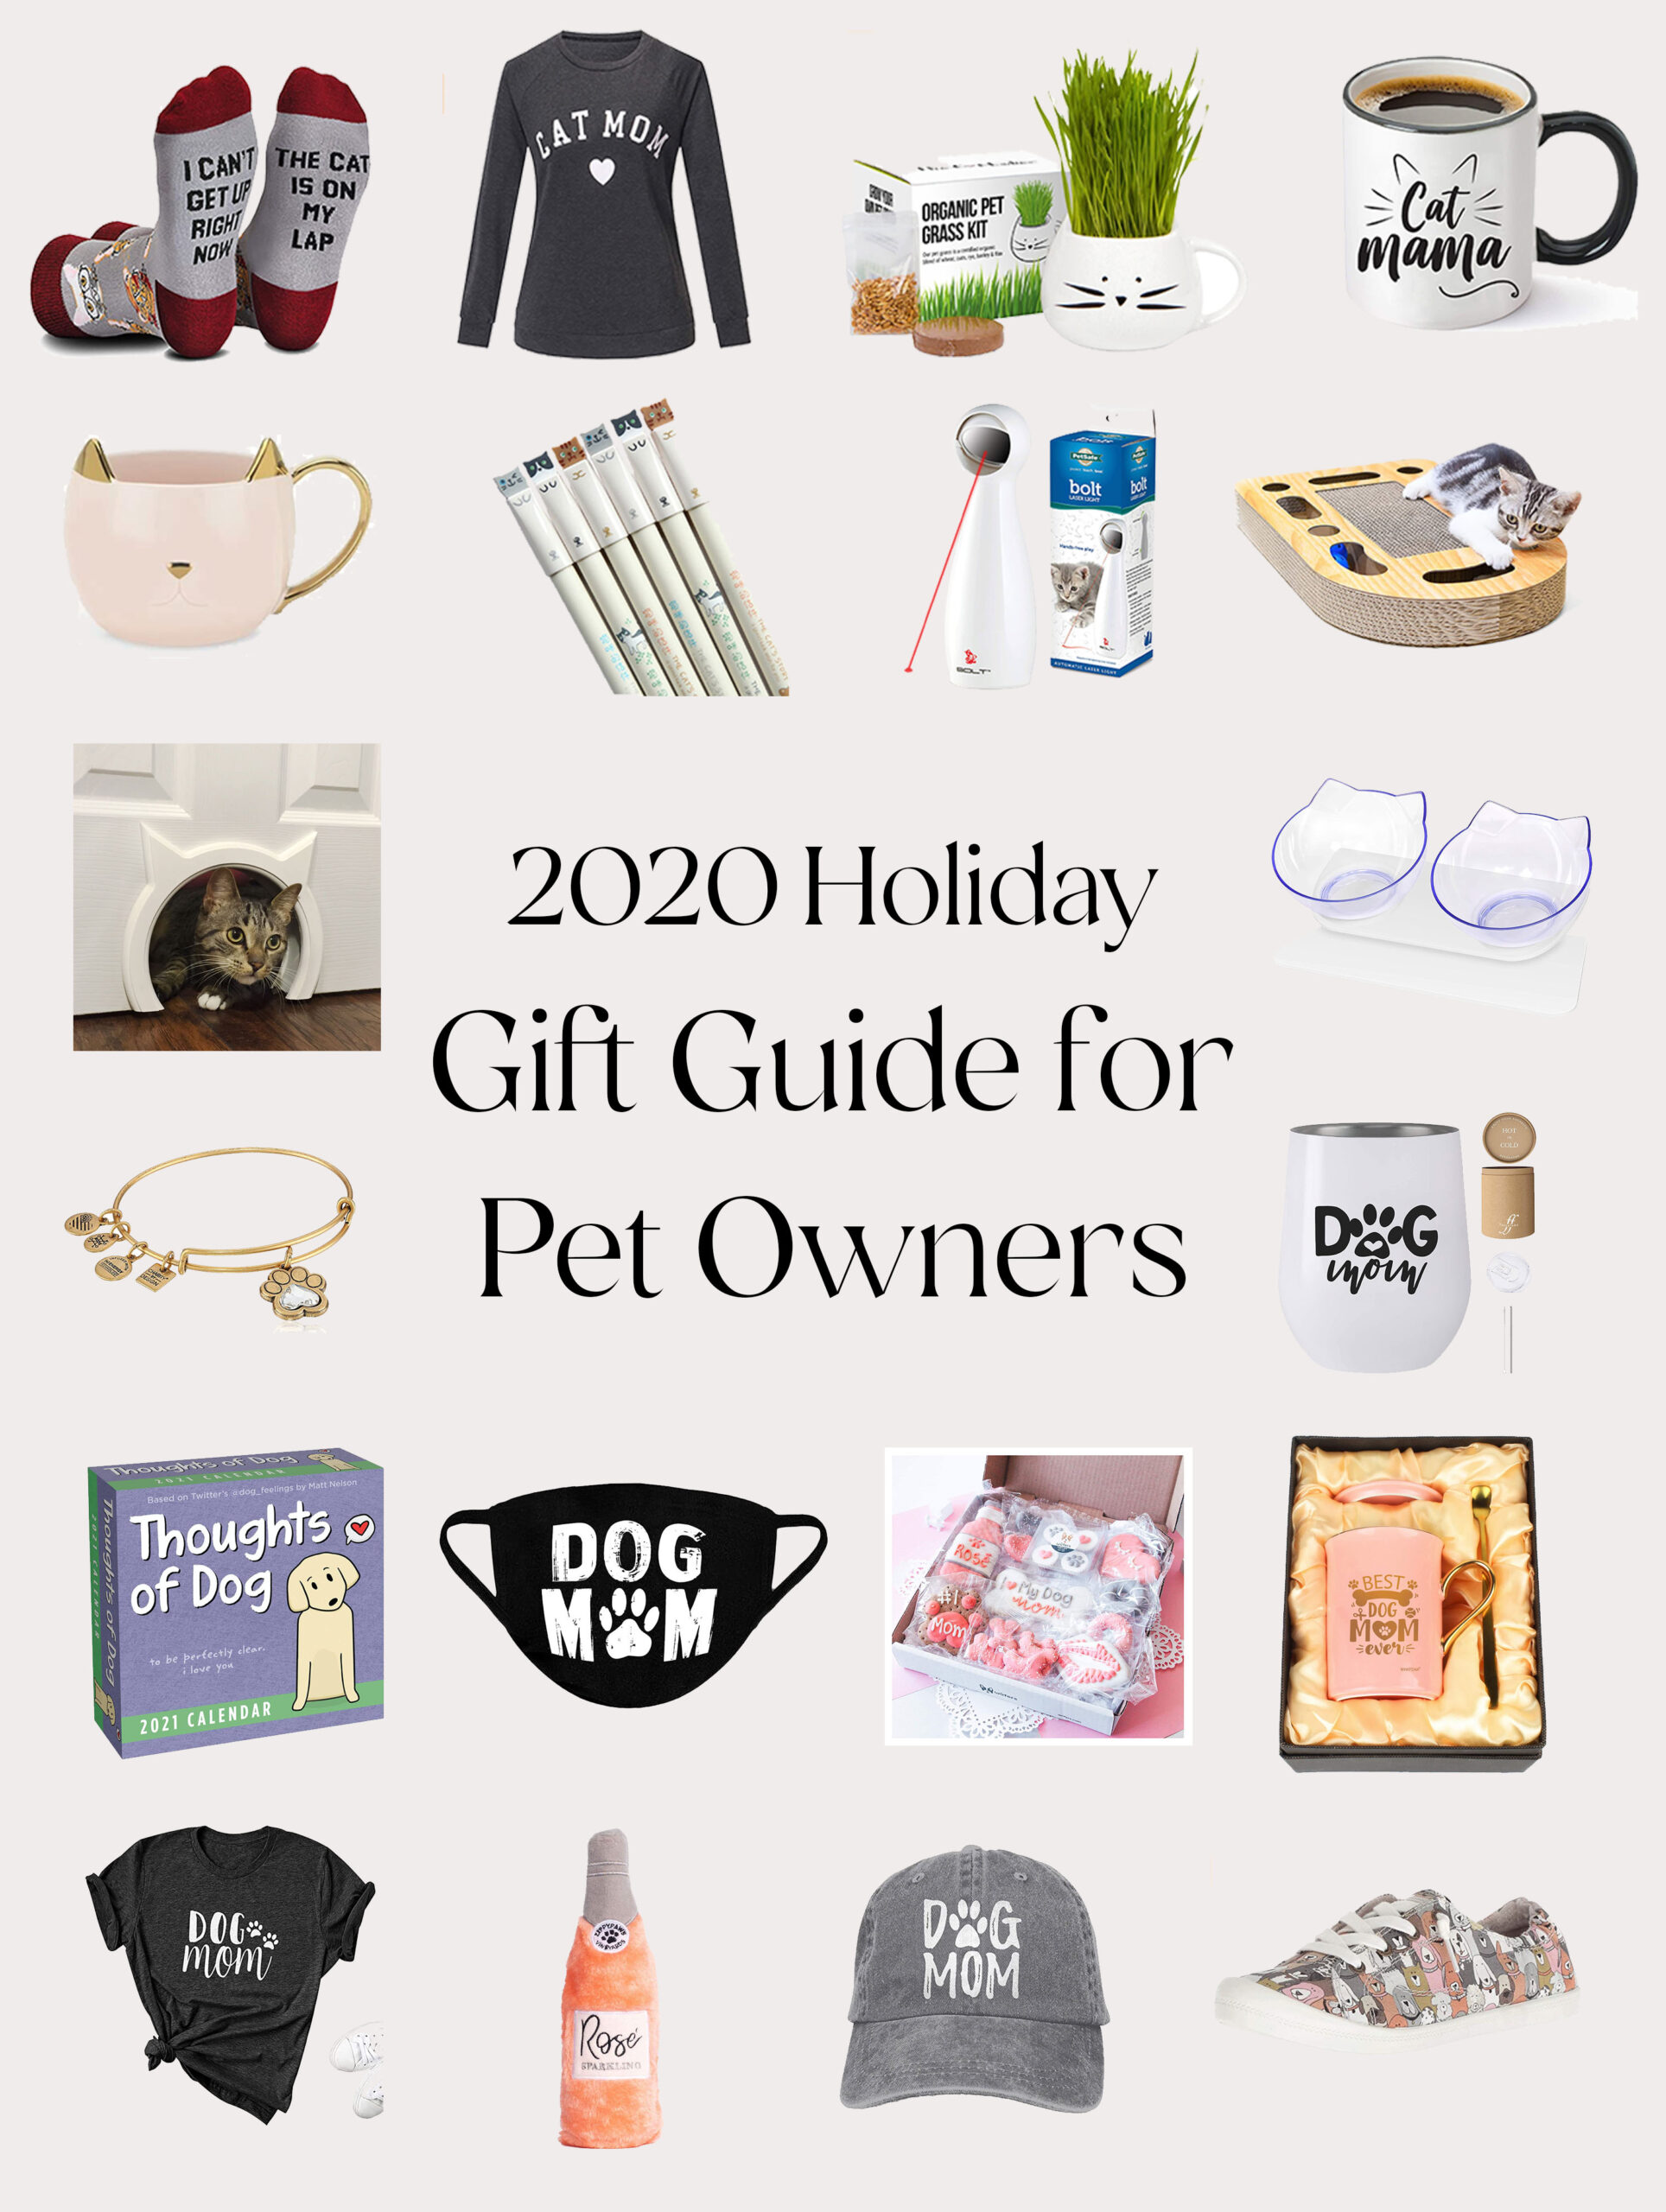 Holiday gift ideas for pet owners, cat owners, cat moms, dog owners, and dog moms.